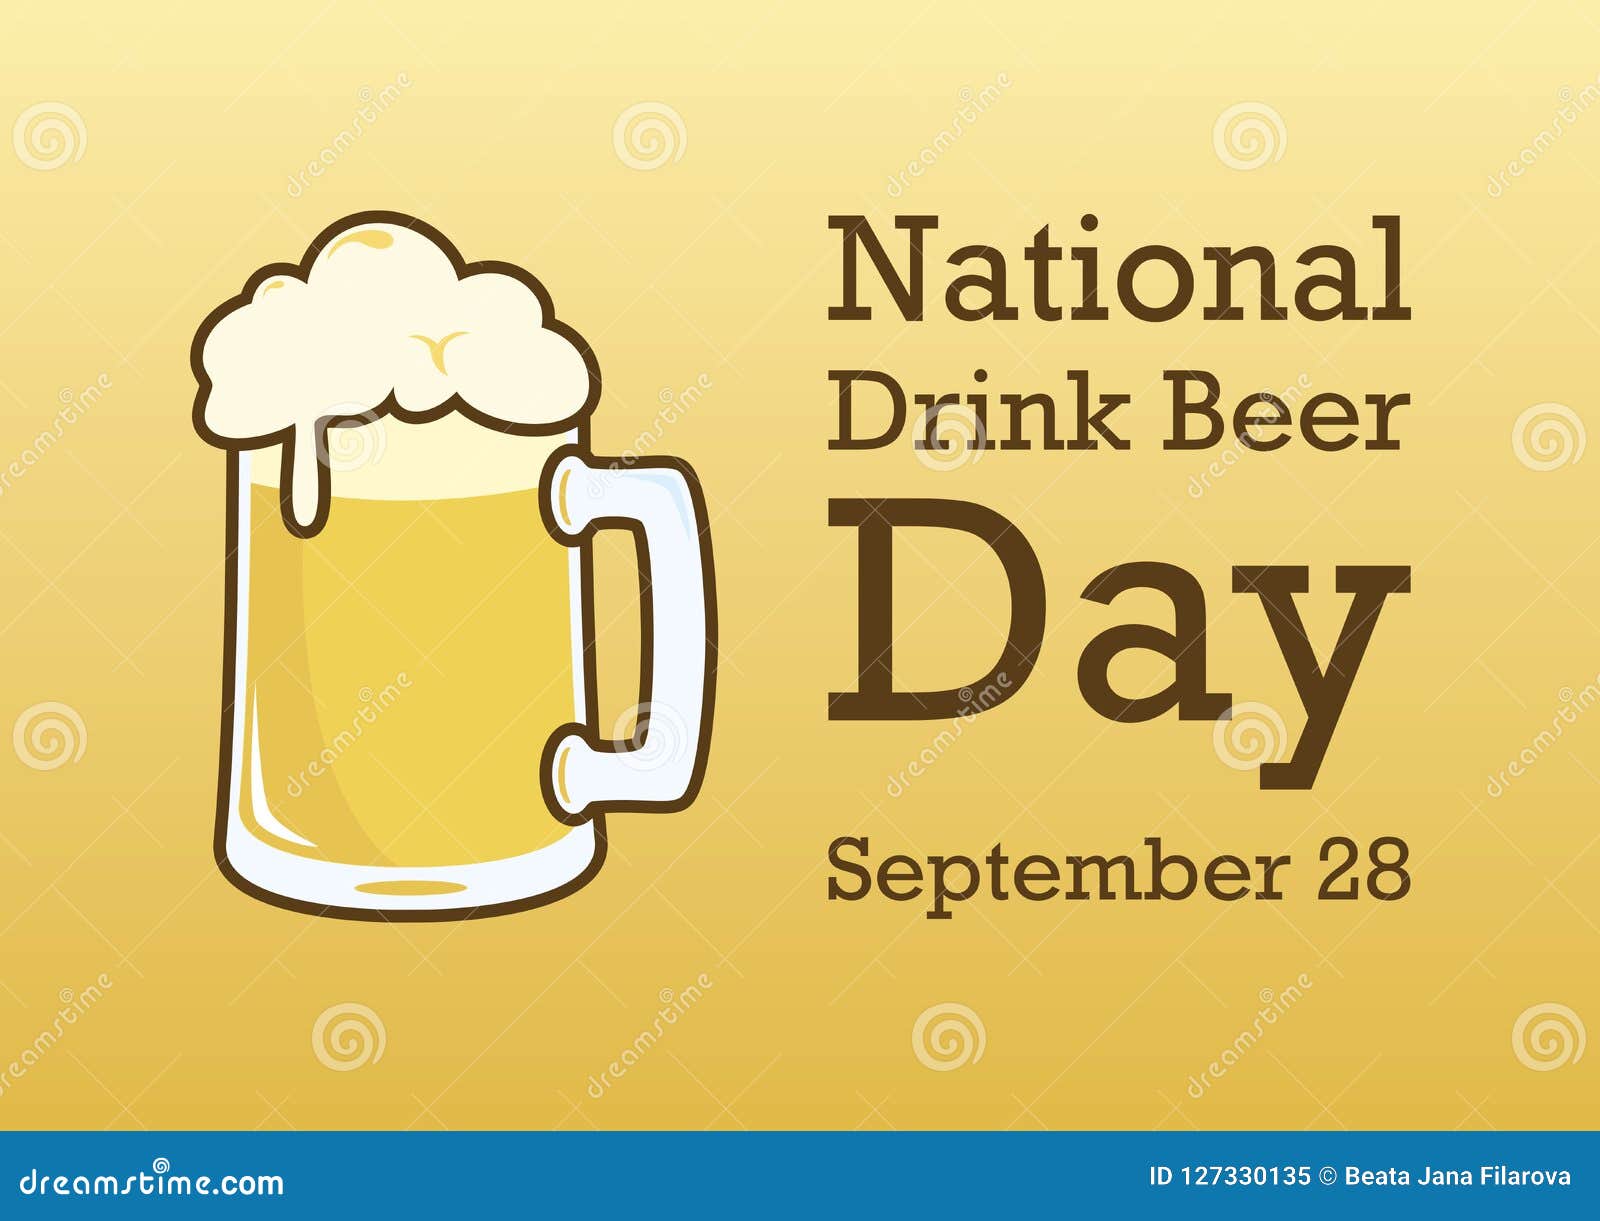 National Drink Beer Day Vector Stock Vector Illustration of drink